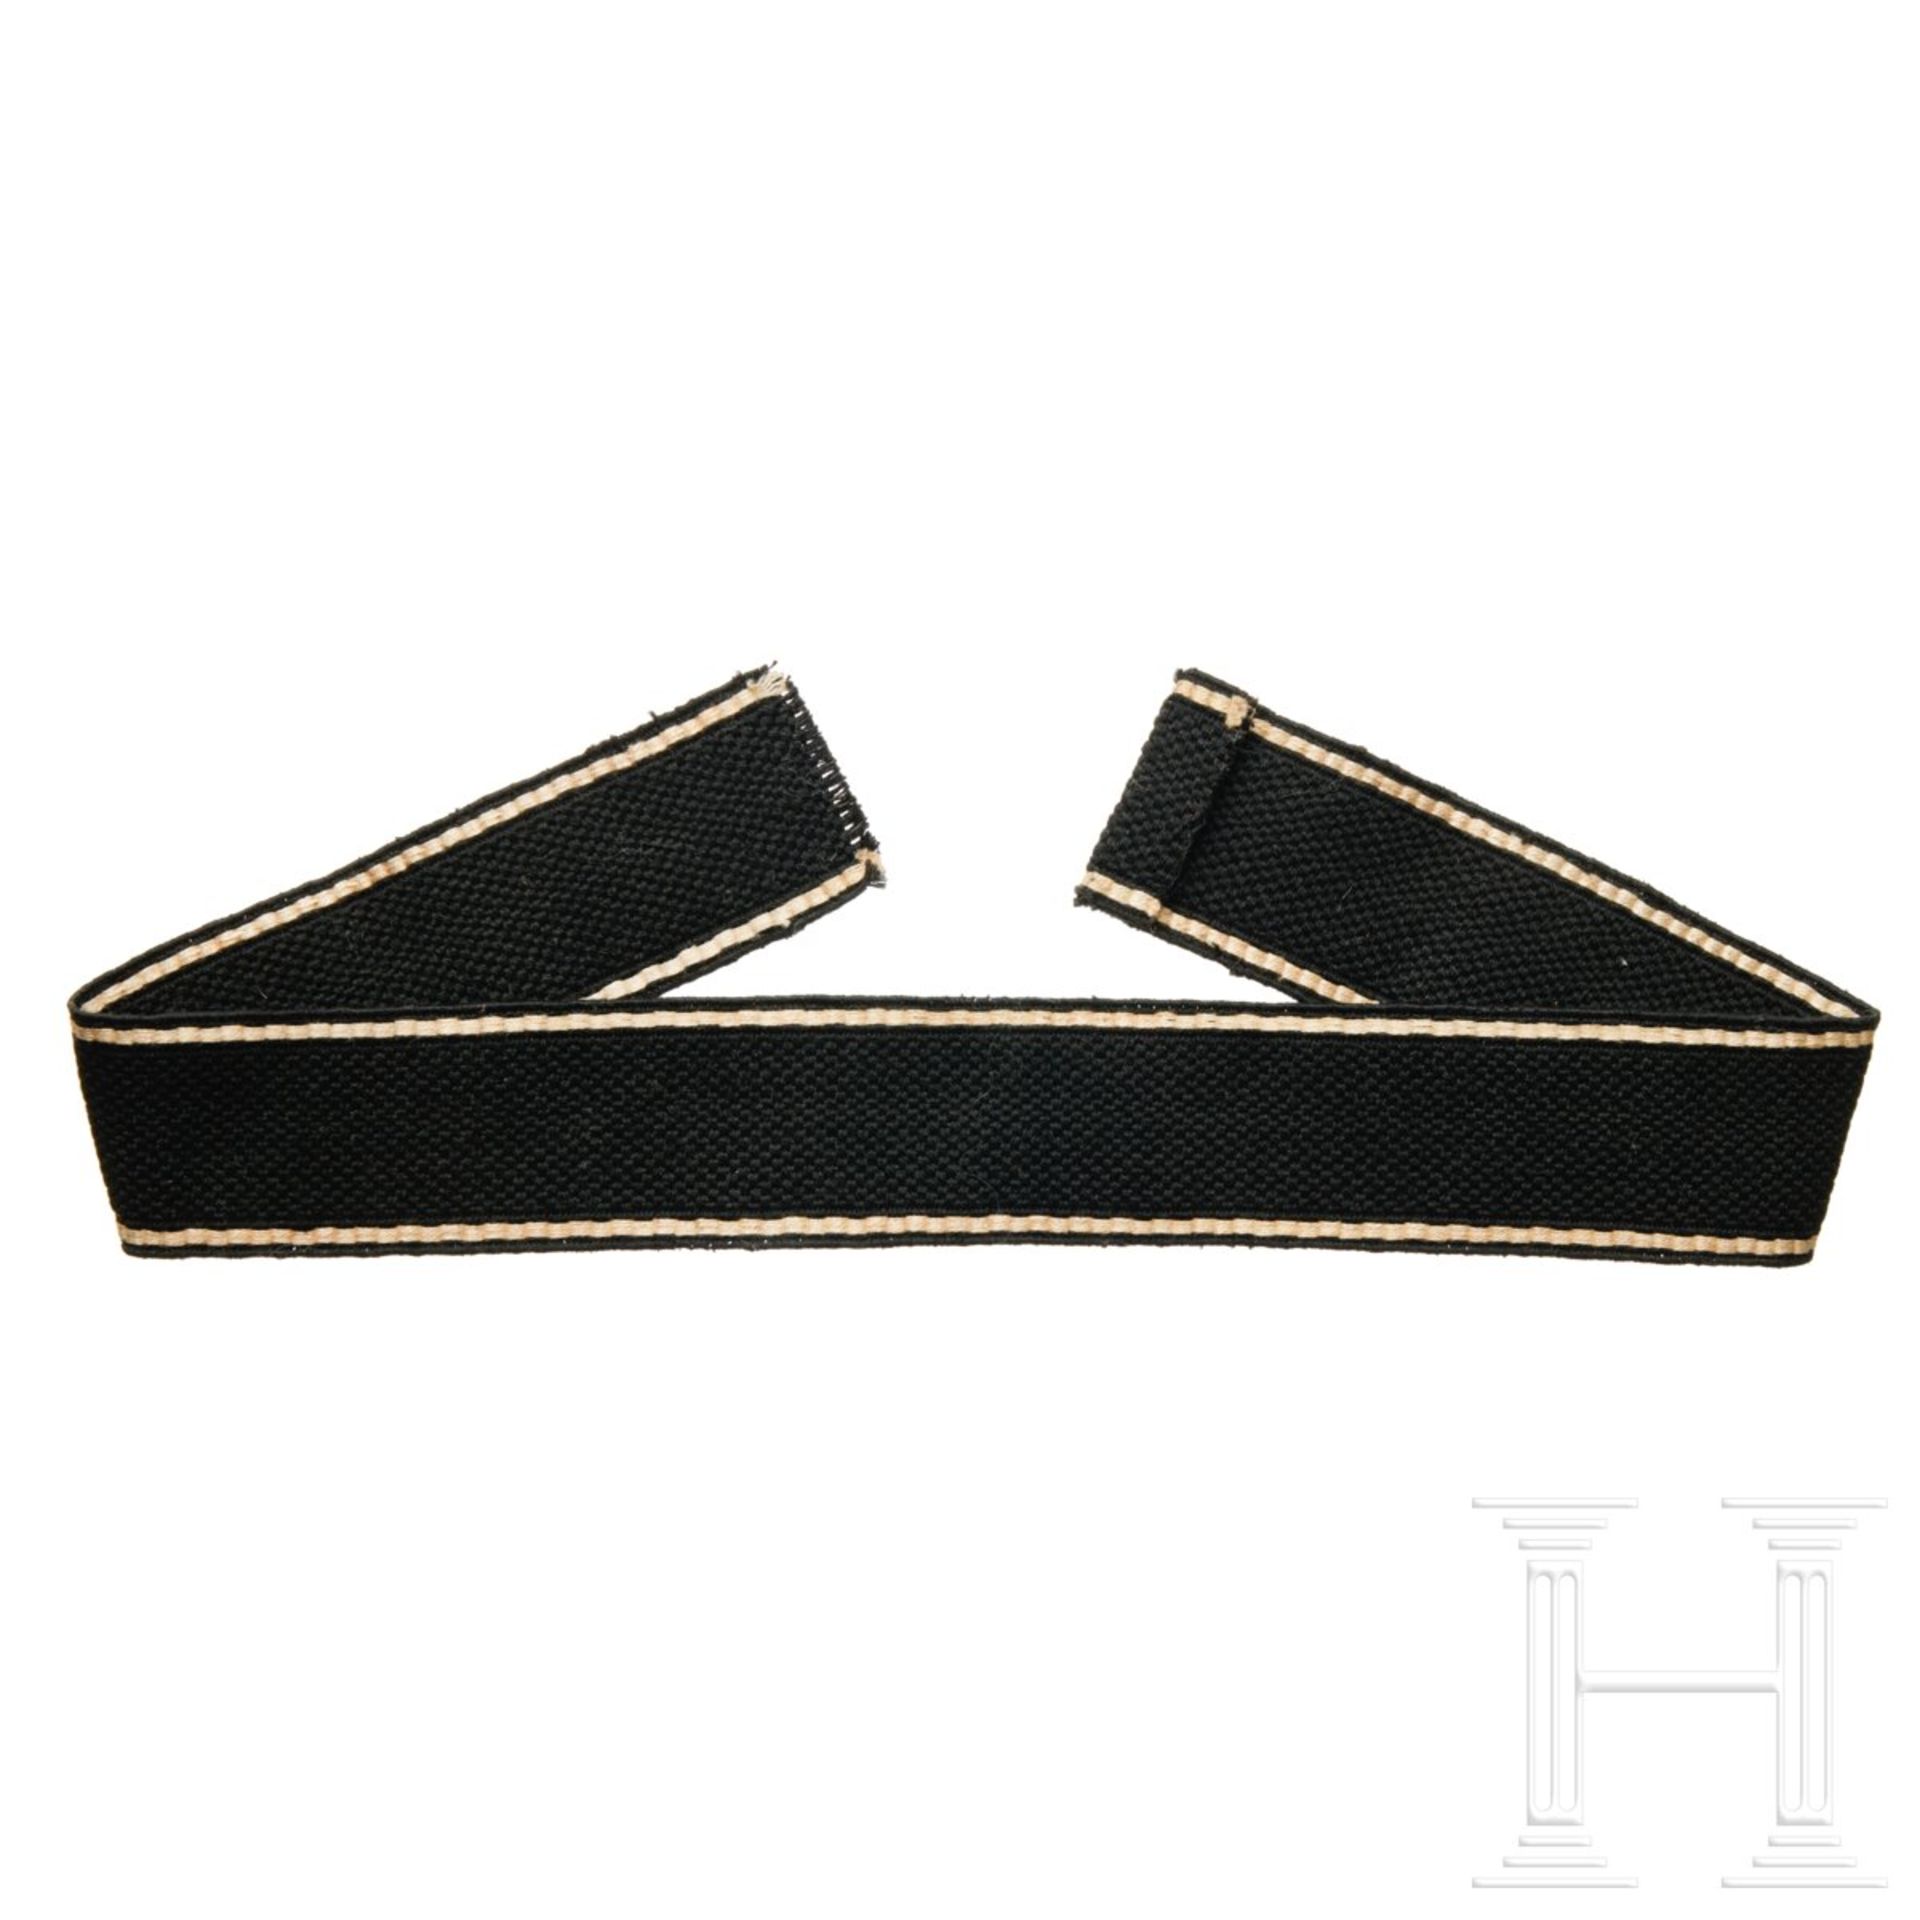 A Cufftitle Blank for SS Enlisted